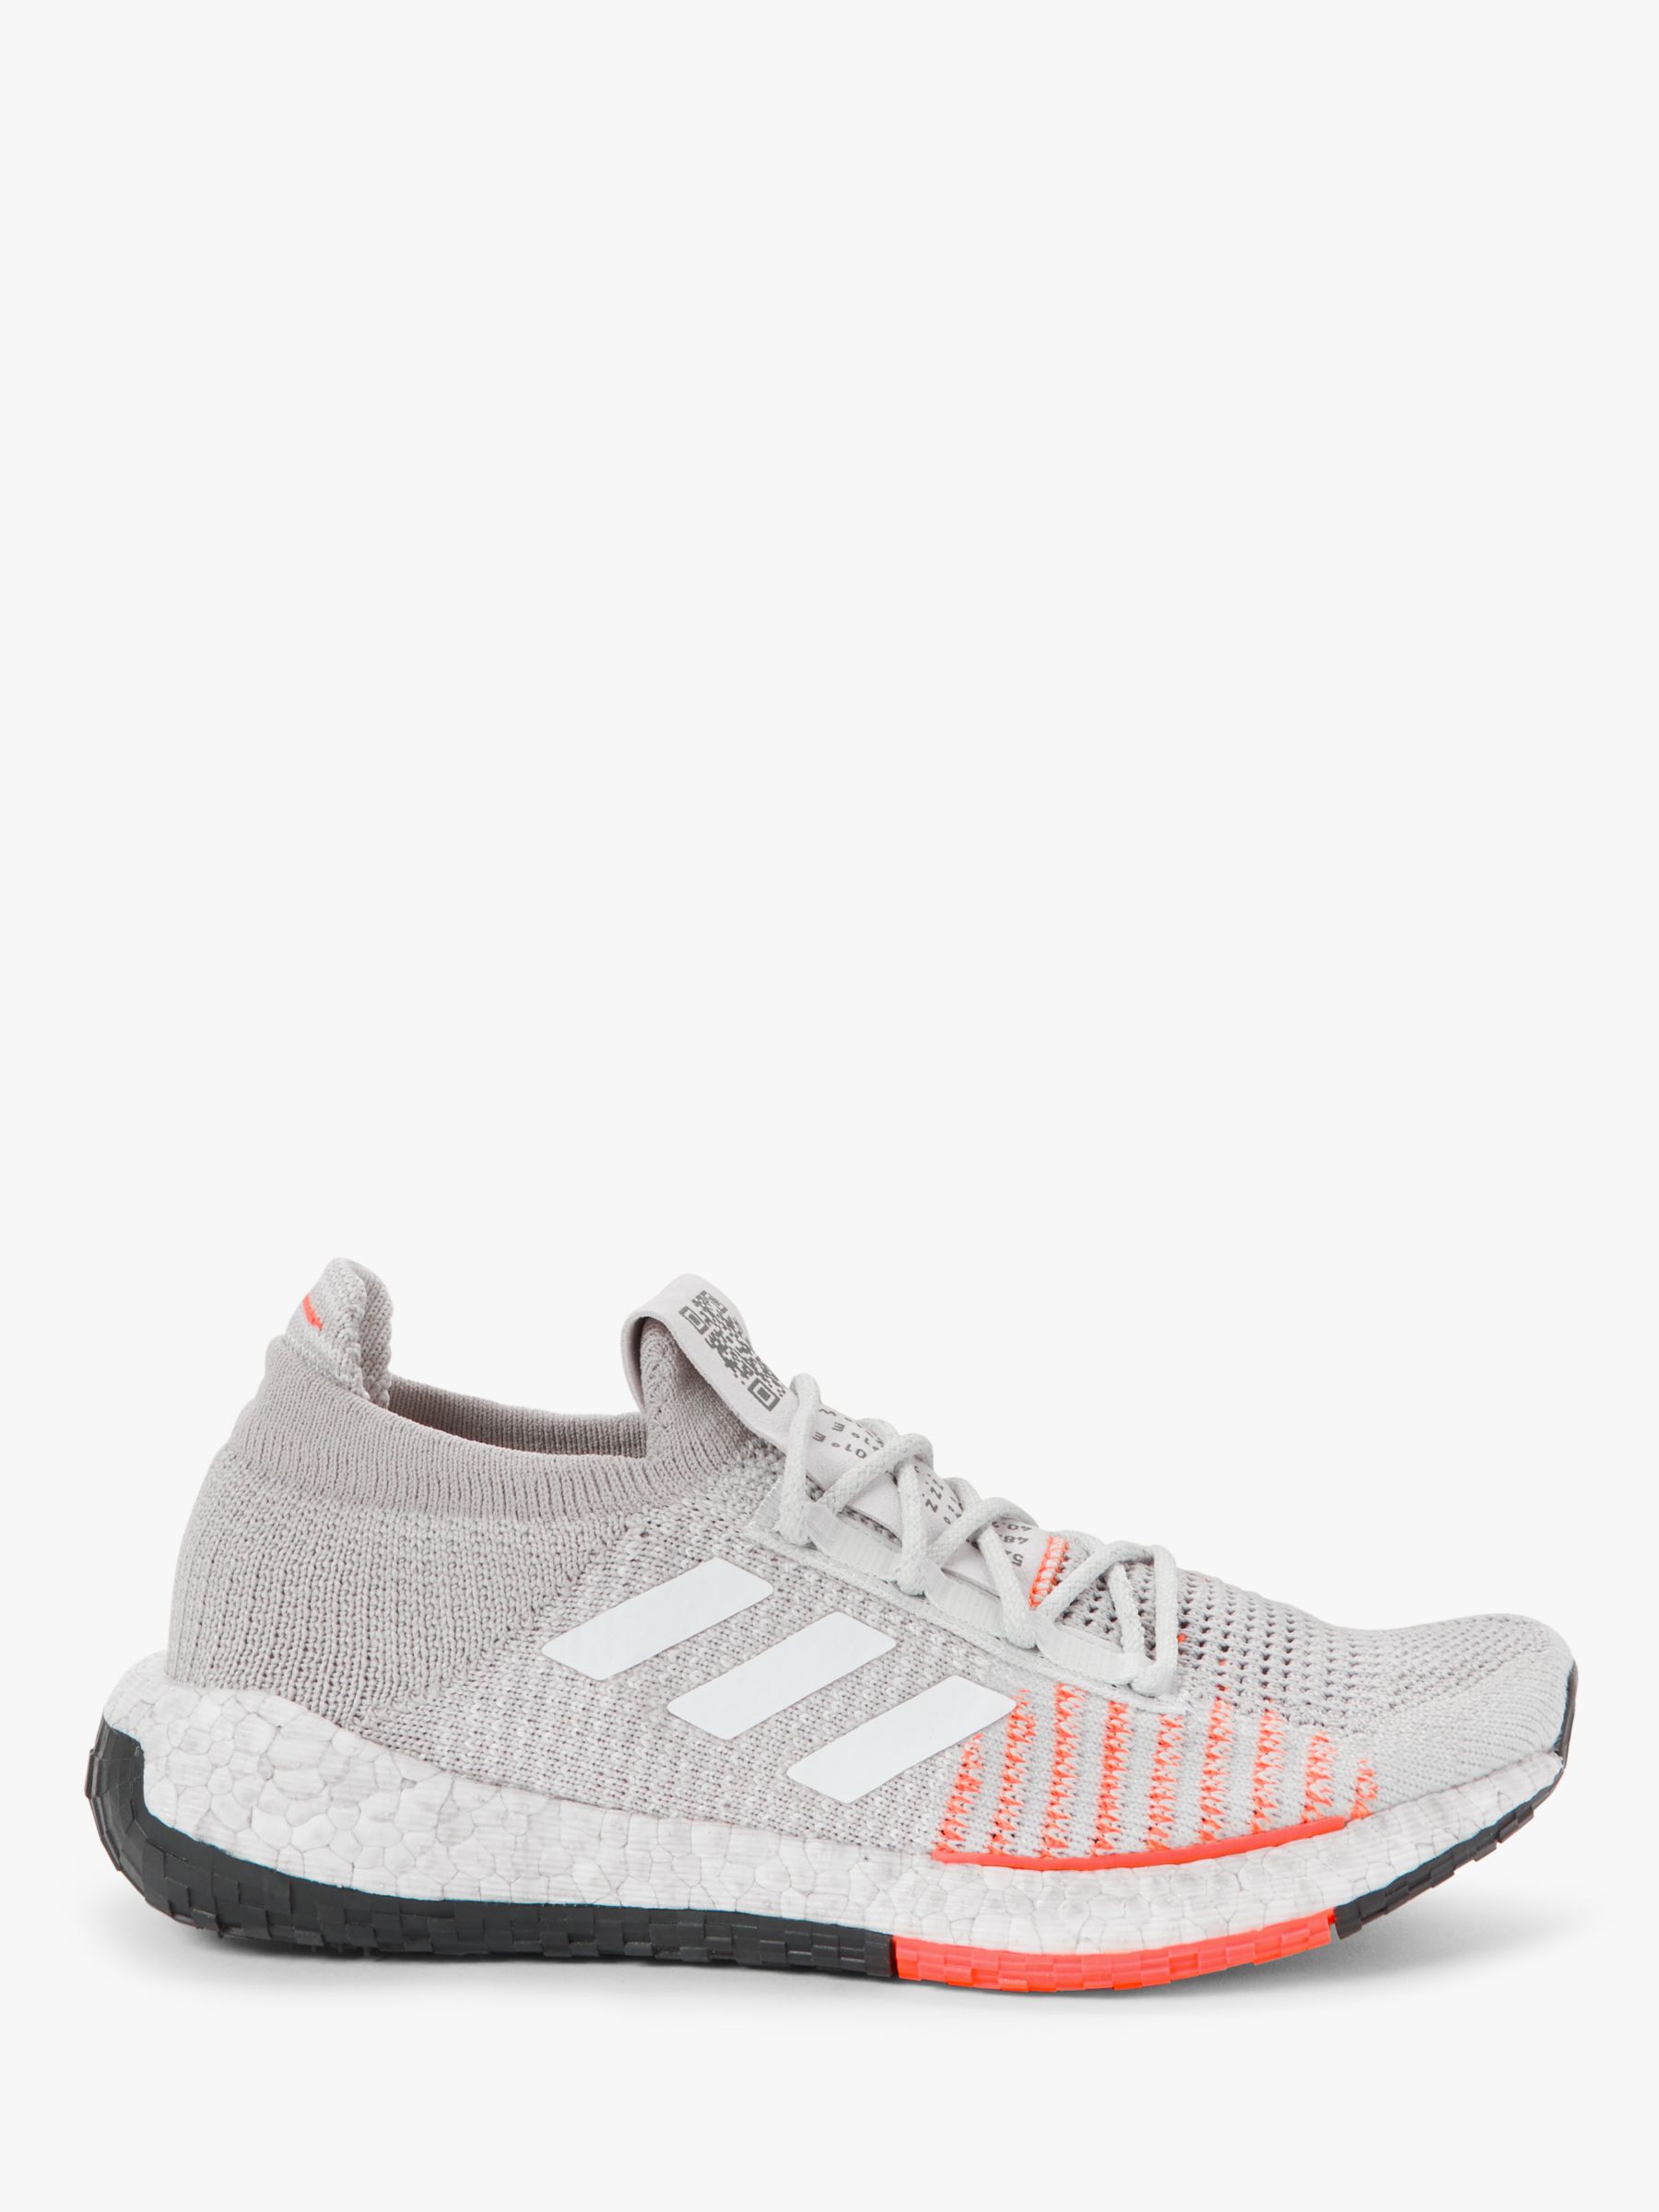 adidas PulseBOOST HD Women's Running Shoes, Grey One/FTWR White/Hi-Res ...